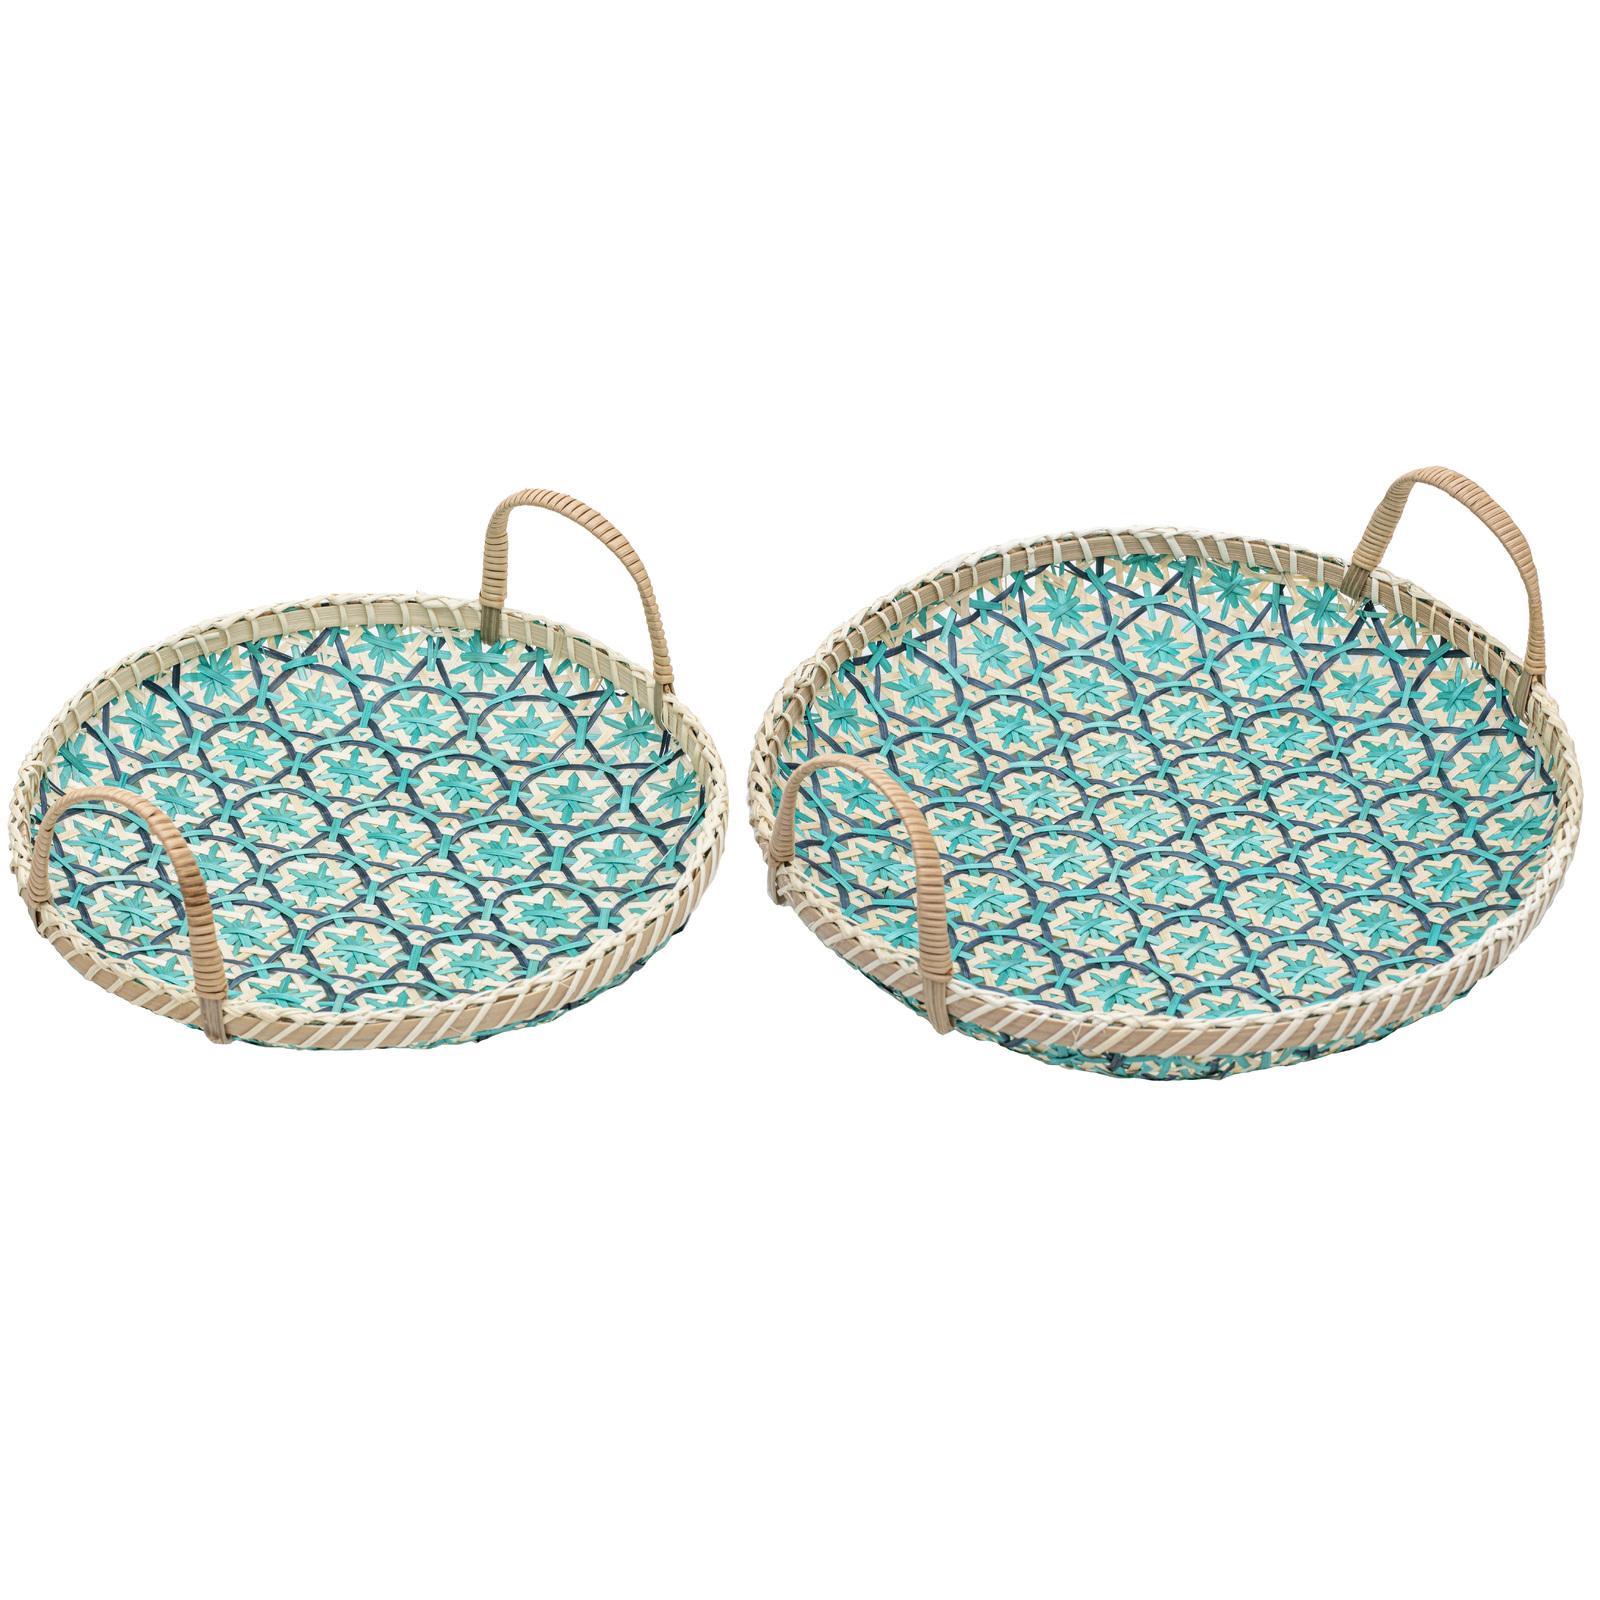 2pc Ladelle Bamboo Woven Serving/Entertaining Tray 36x12cm/30x10cm Set Blue/Teal